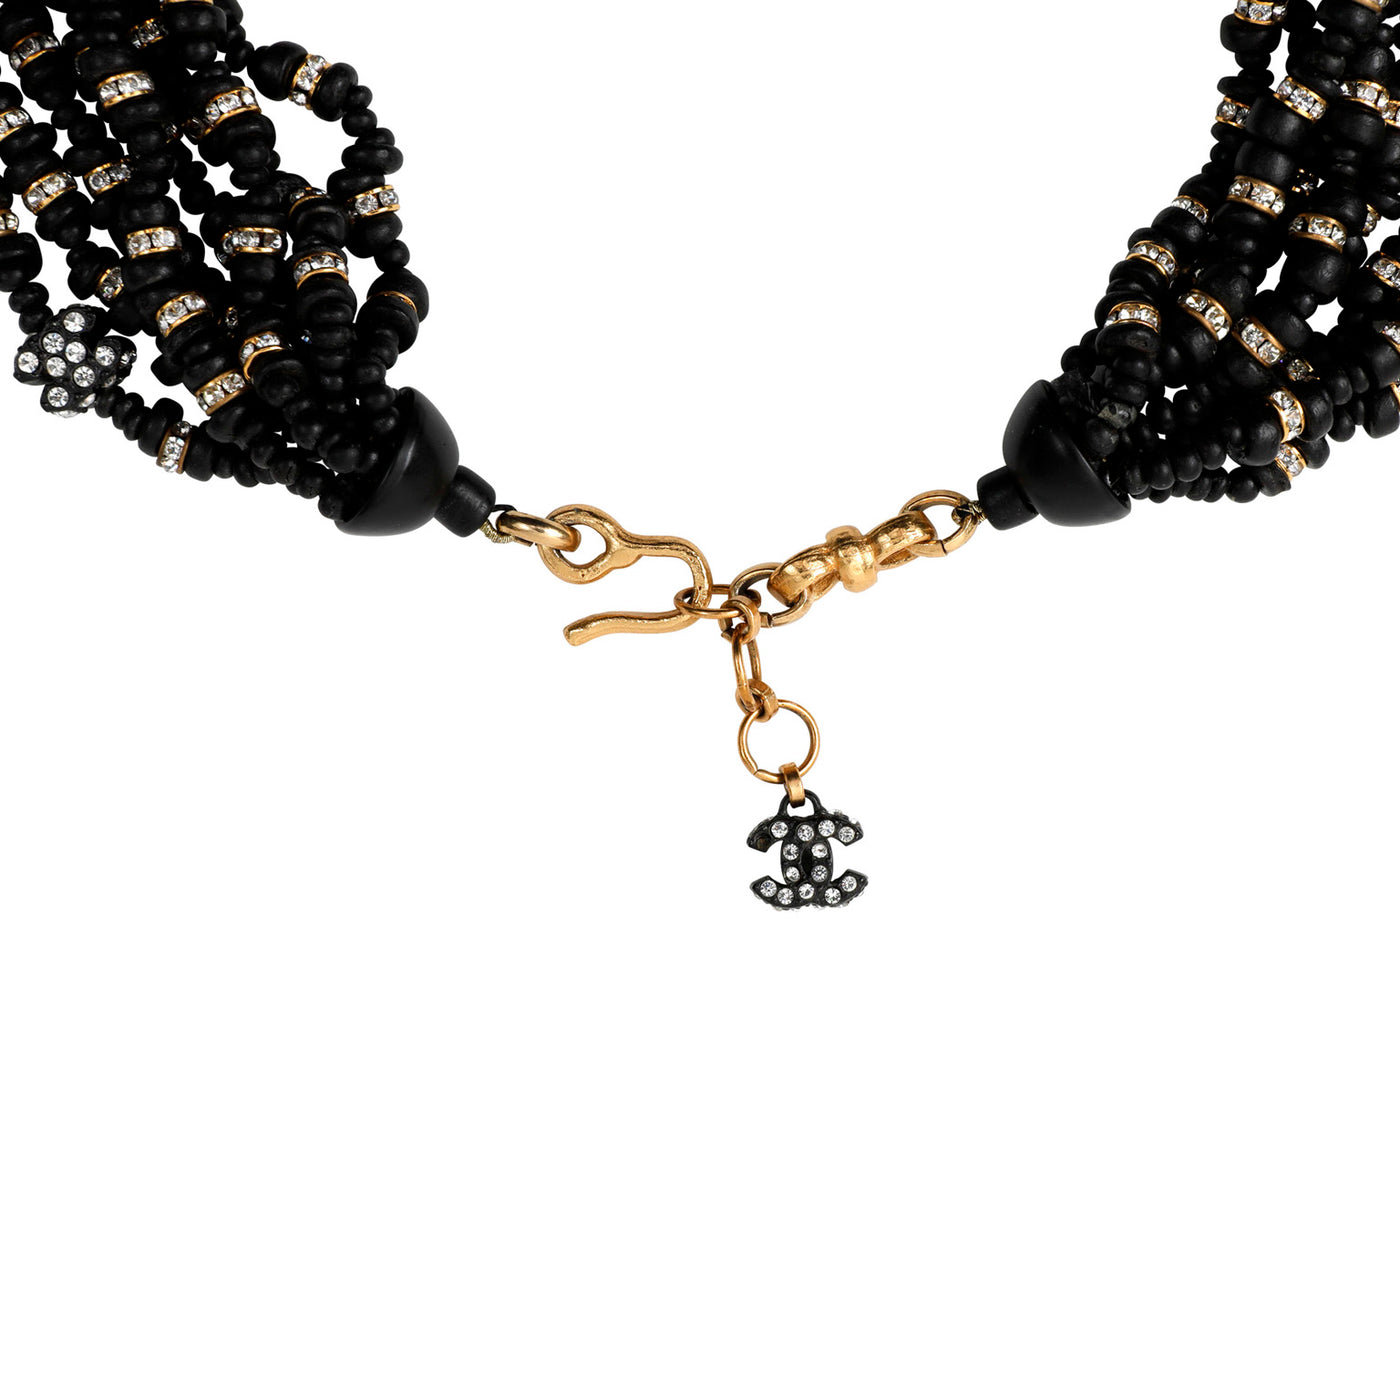 Chanel Vintage Black Beaded Runway Necklace with CC Charms 1980